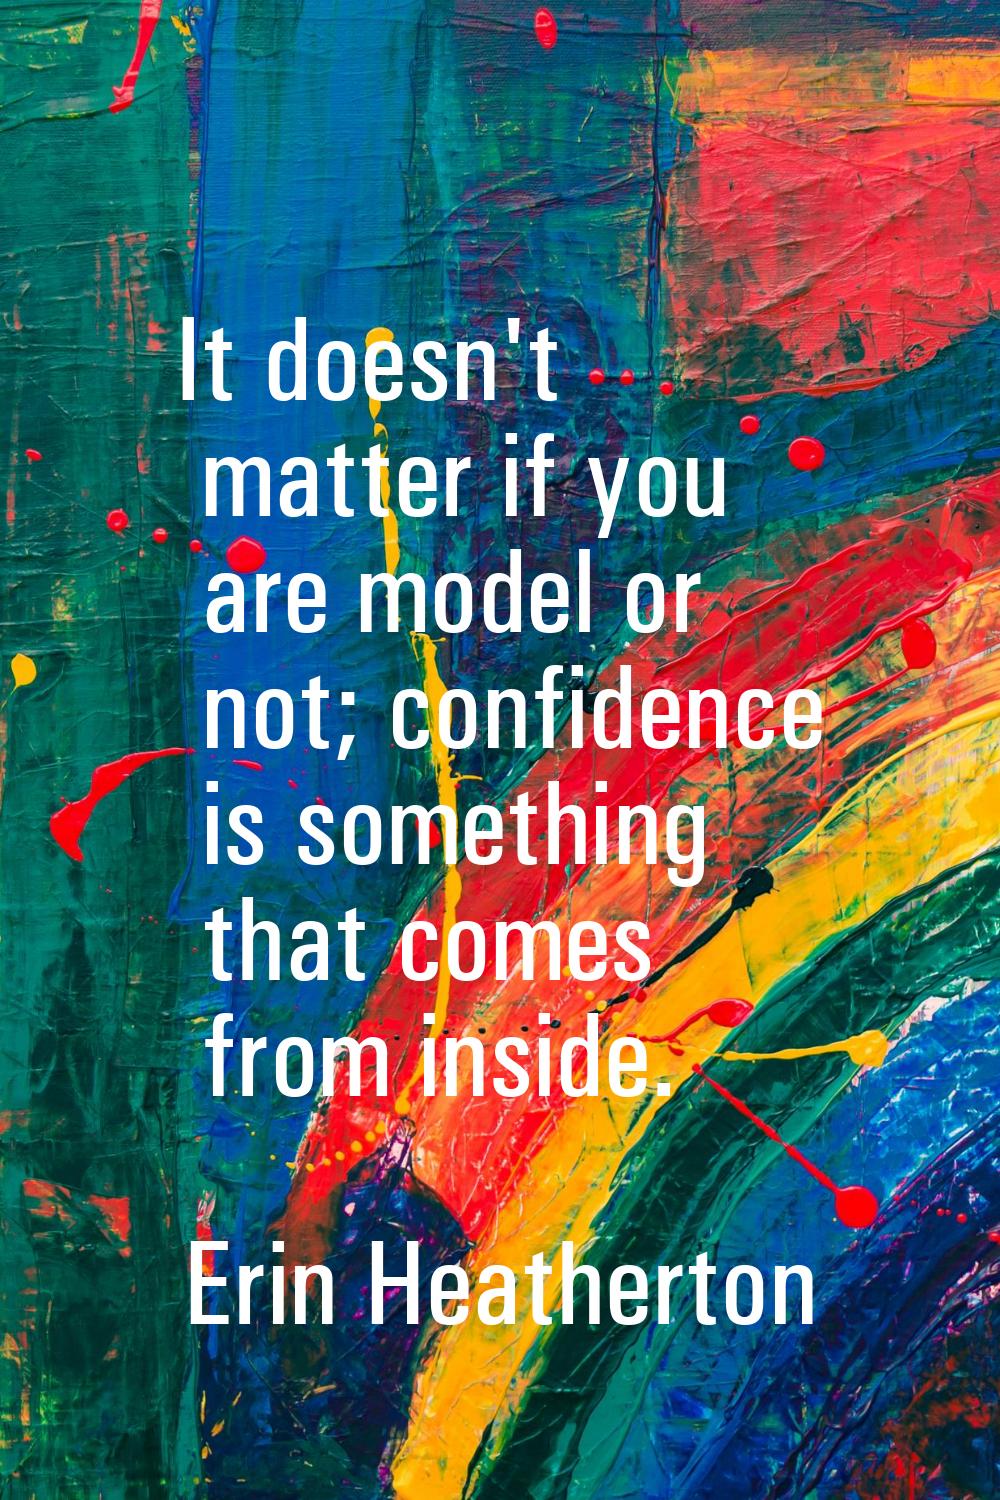 It doesn't matter if you are model or not; confidence is something that comes from inside.